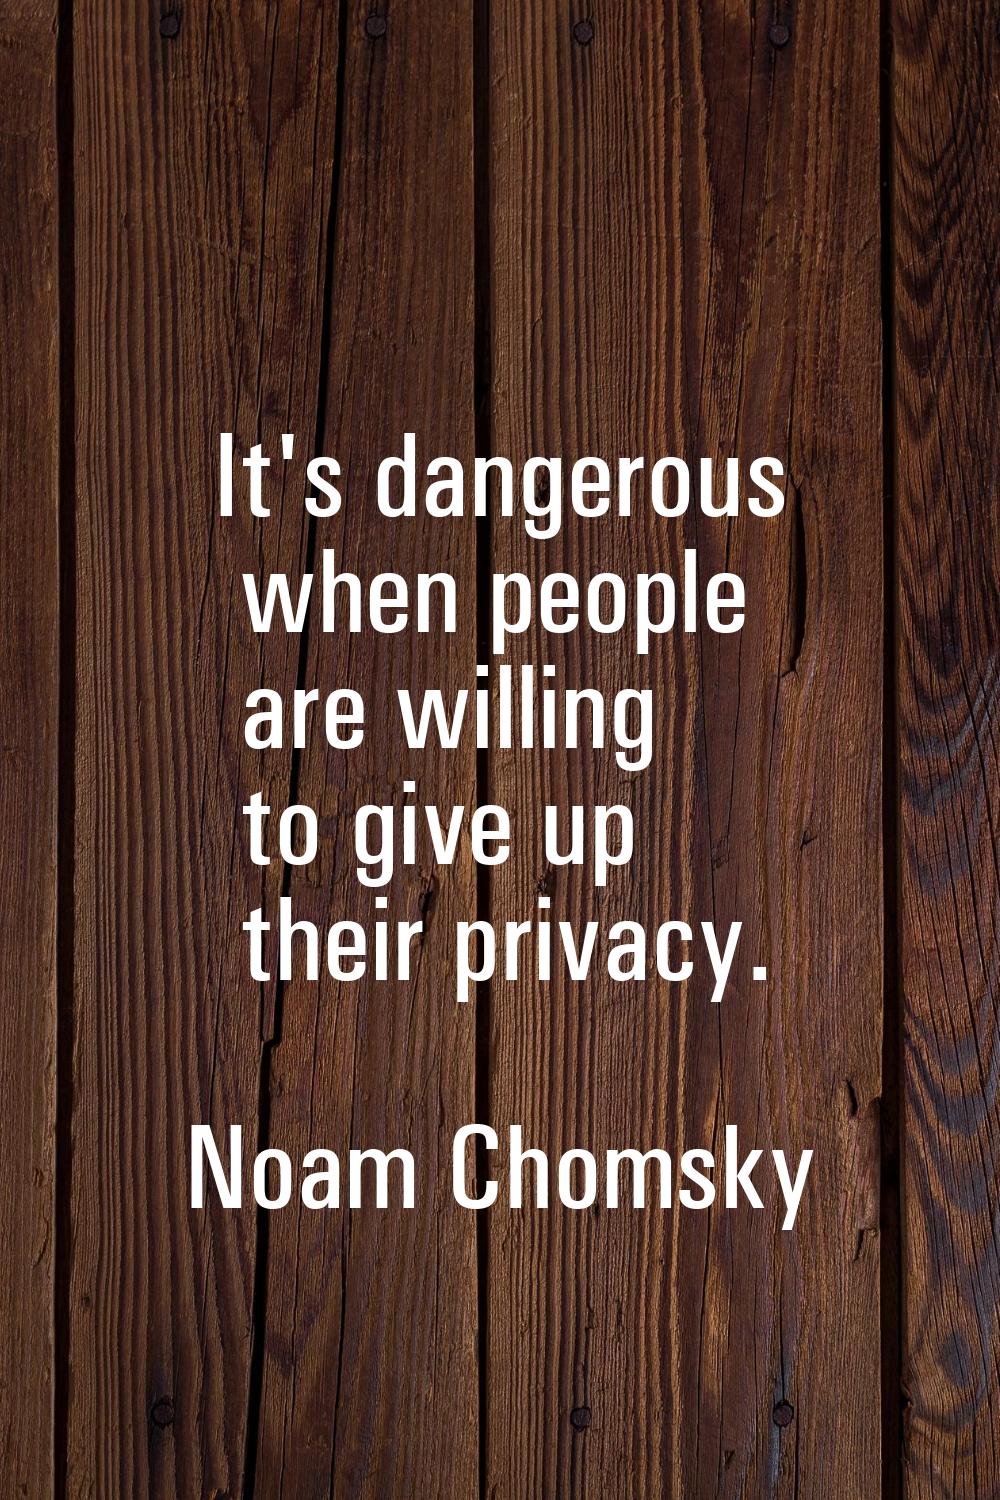 It's dangerous when people are willing to give up their privacy.